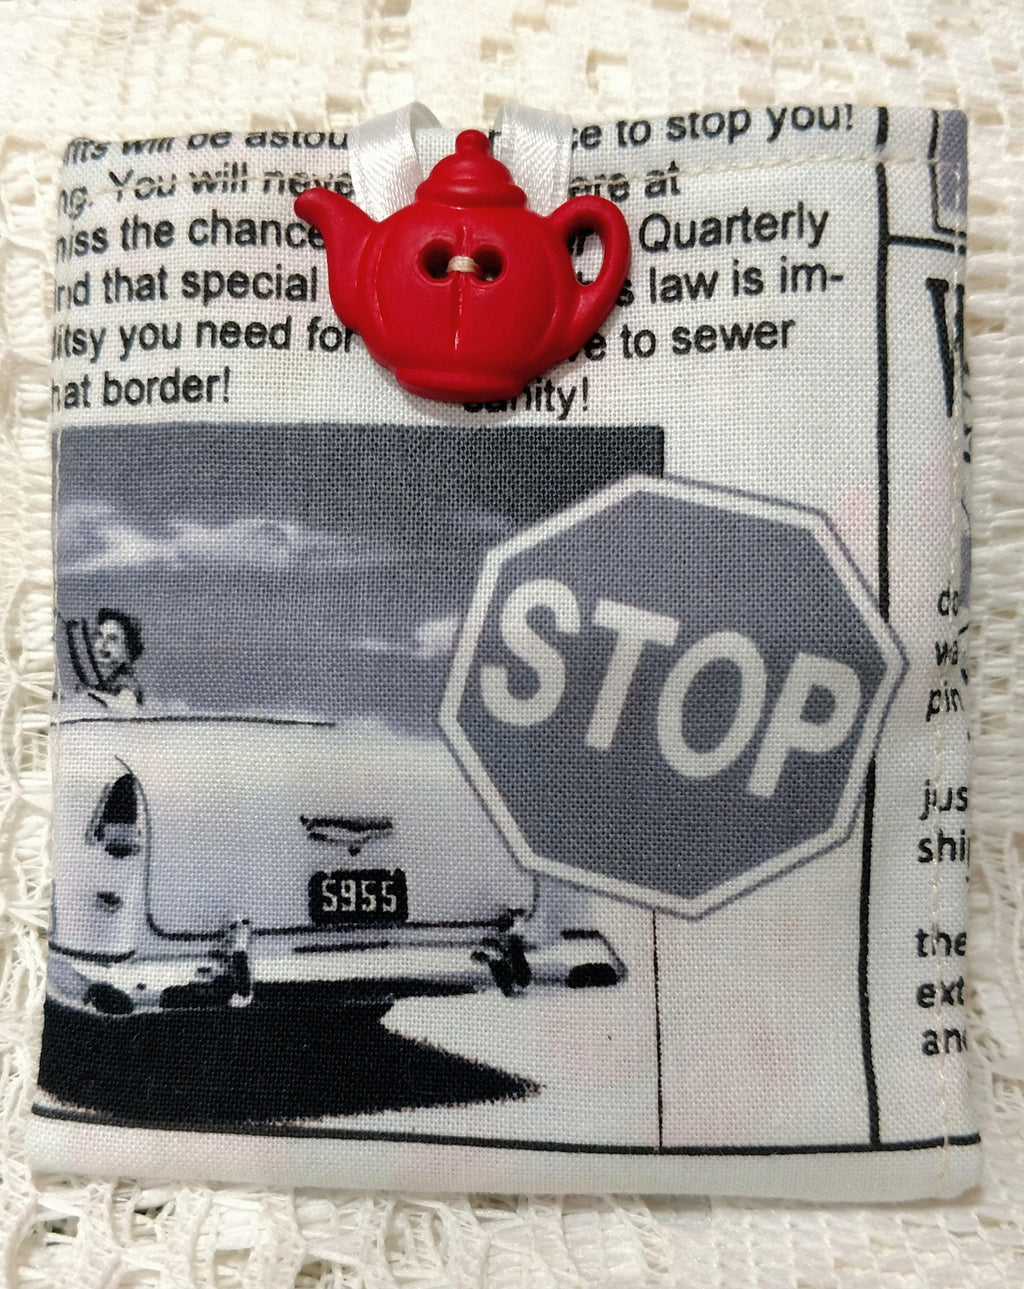 In The News Tea Wallet Fabric Tea Bag and Sweetener Envelope for the Purse - One of a Kind!